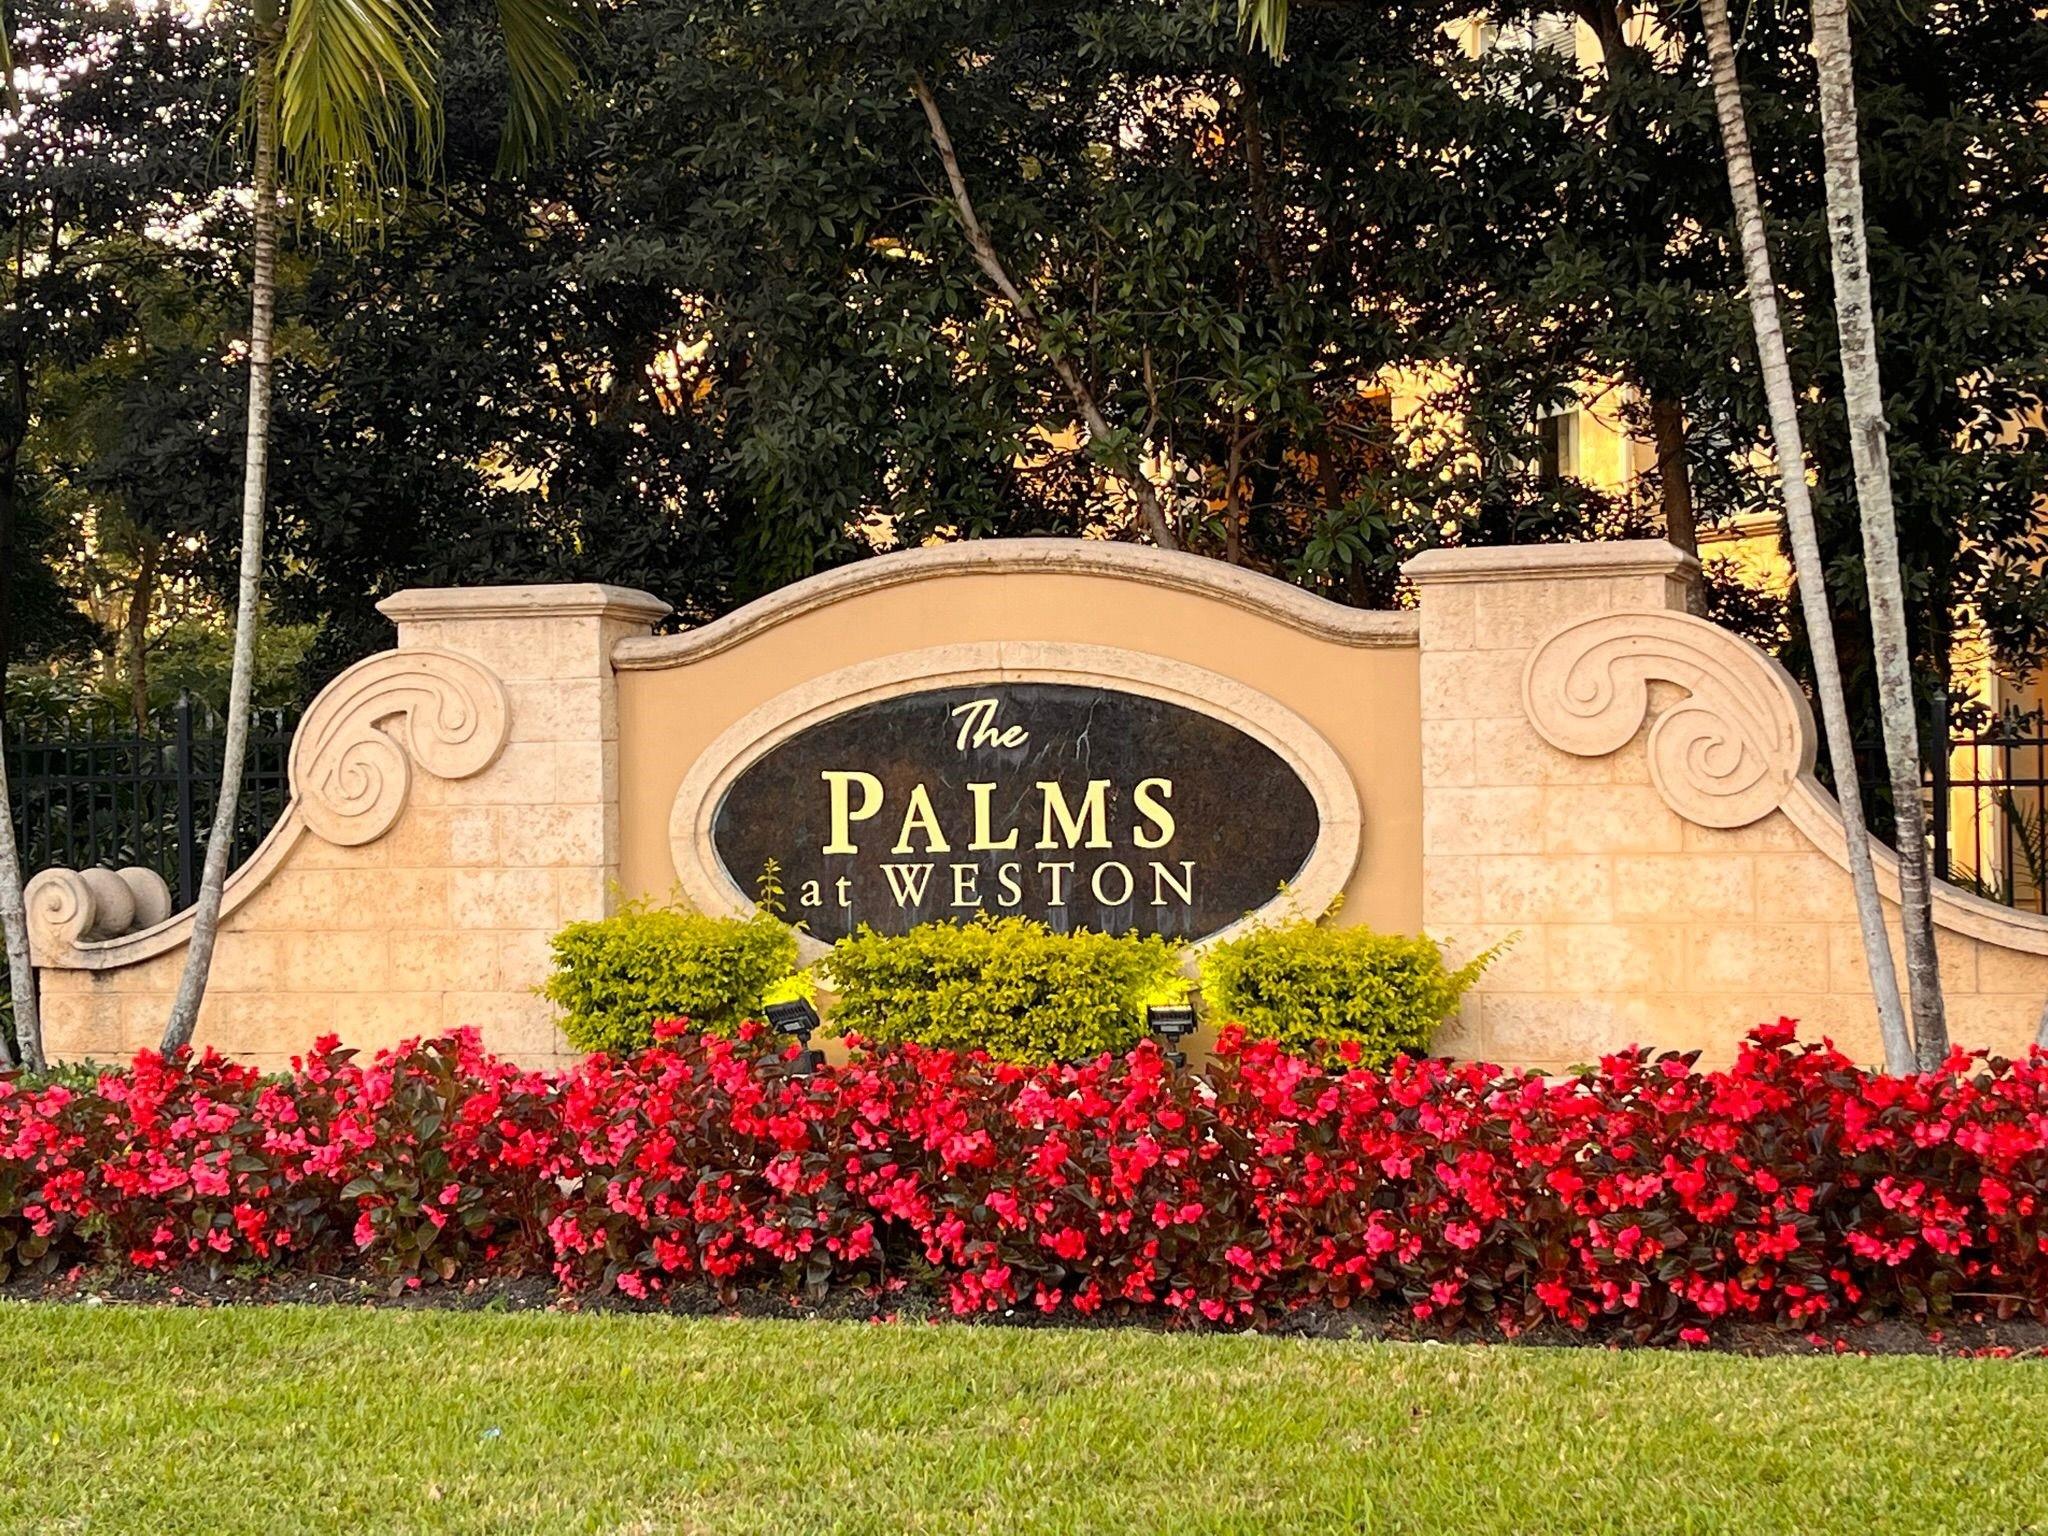 Elegant and spacious, fully furnished, two bedroom Condo at The Palms 55 plus Community in Weston. Situated
on the 1st floor for easy access to all amenities in a resort style condominium. Freshly painted with new luxury
vinyl floor. Both bedrooms are in suite with additional guest bathroom. Kitchen with Granite counter-tops,
stainless steel appliances and wood cabinets. Concierge, pool, restaurant, fitness center, library, game room,
business center and more. Walking distance to supermarket, banks, restaurants, and Emerald Estates Park.
Minutes to Cleveland Clinic Hospital and major highways. Rent includes Fitness Center, Cable & Internet, Water,
and $180 per quarter at restaurant.